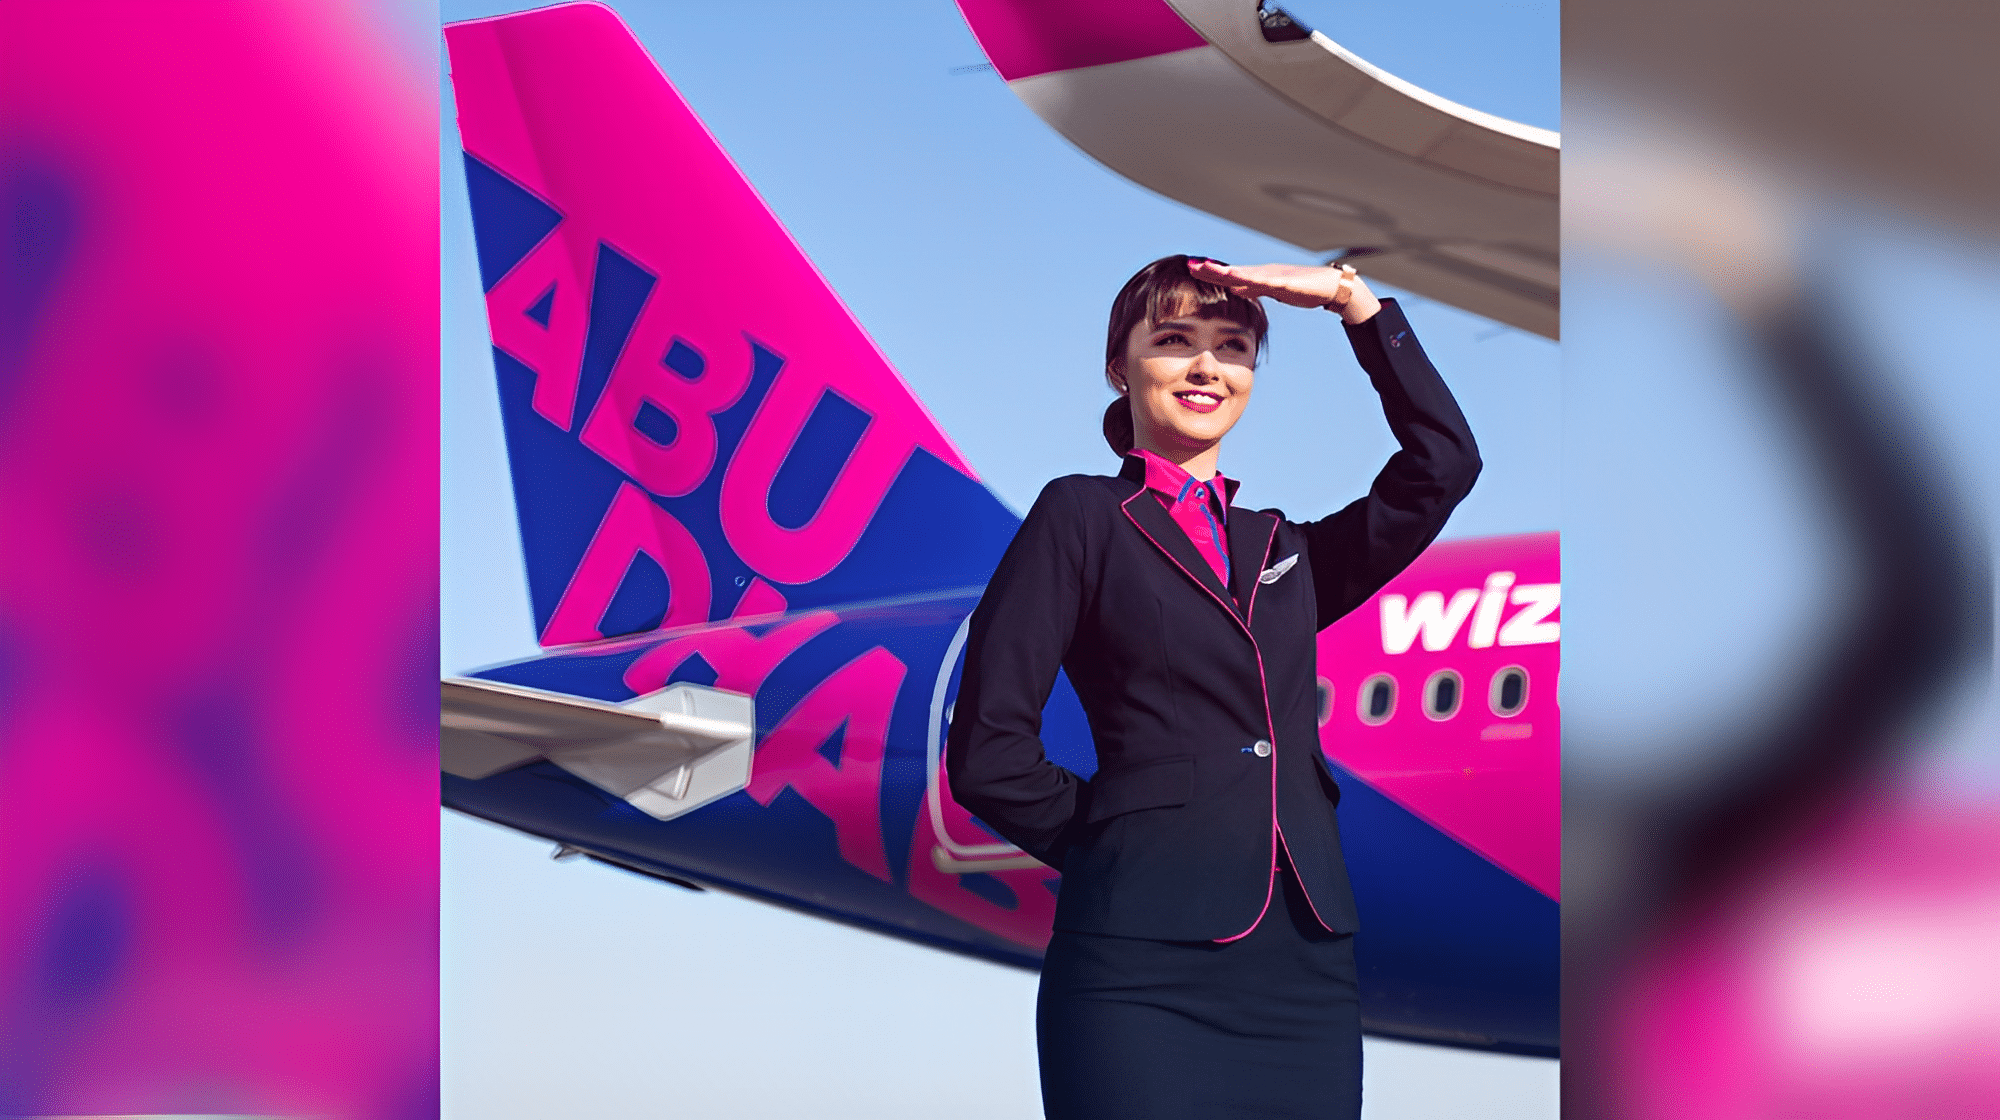 wizz-air-abu-dhabi-launches-affordable-holiday-flights-from-aed-129